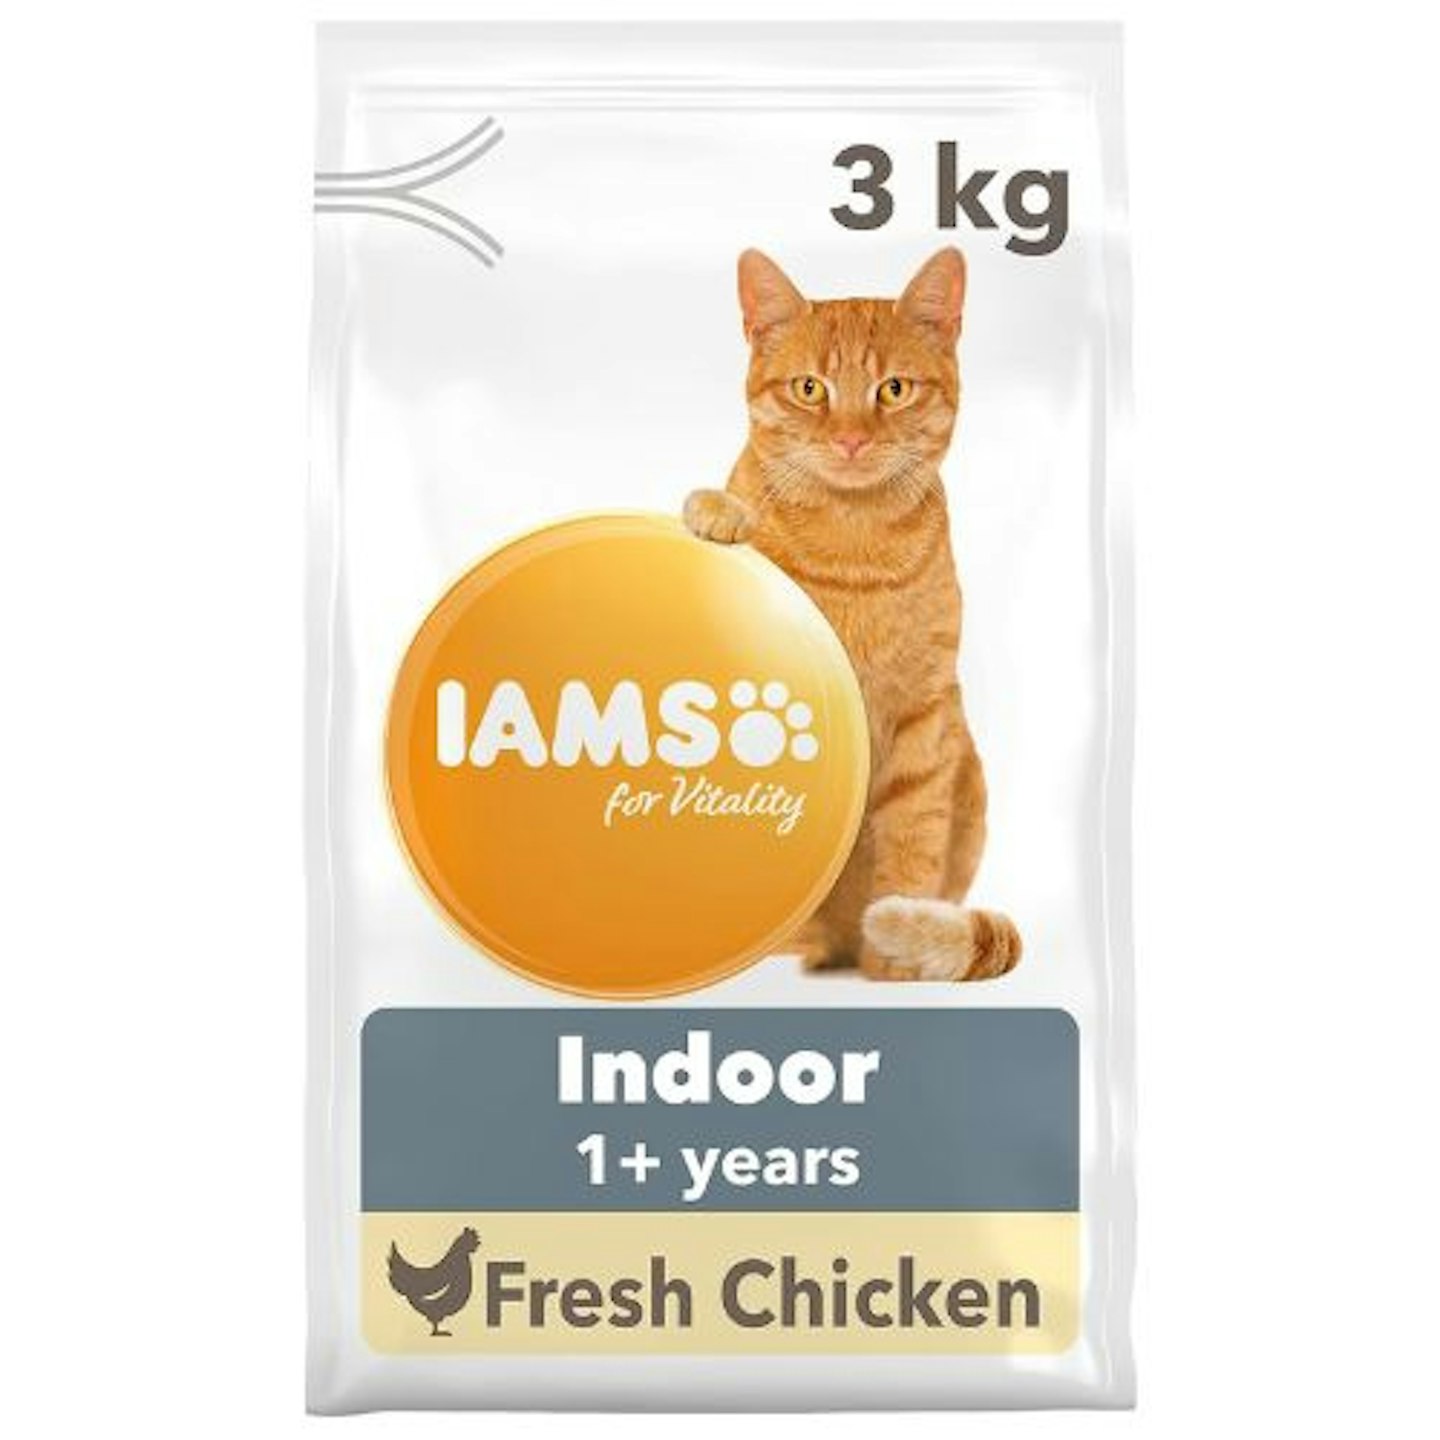 IAMS Indoor Complete Dry Cat Food for Adult and Senior Cats, 3kg